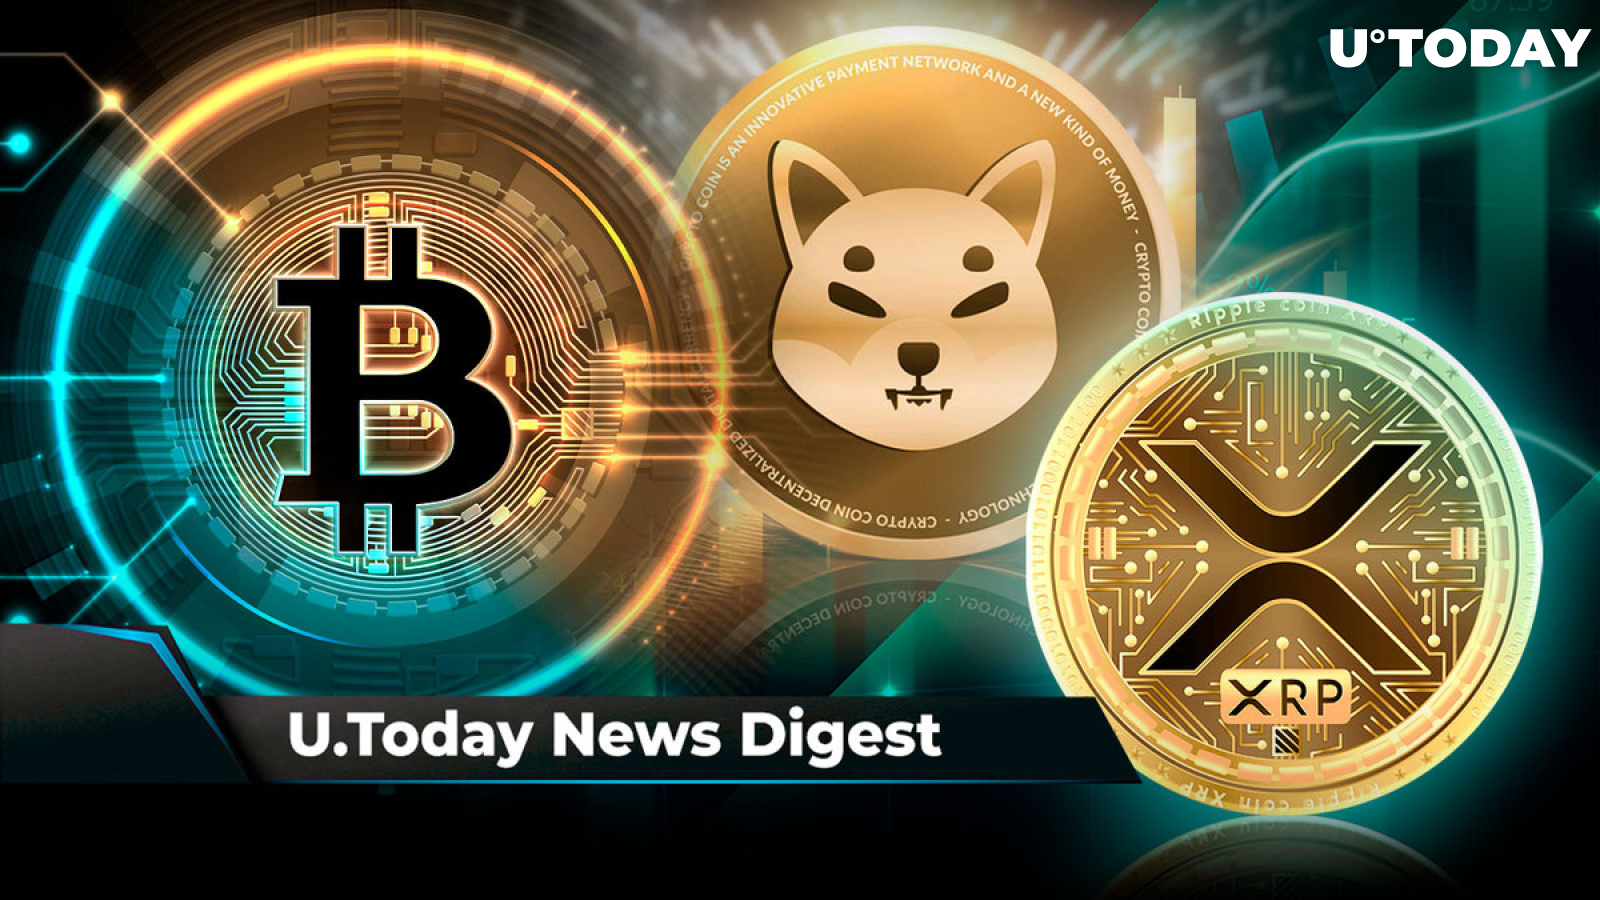 Here Are Factors That Could Trigger Bitcoin Spike This Week, XRP Attracts $2.5 Million Inflows into Crypto Market, SHIB Rockets to Second Place on Binance: Crypto News Digest by U.Today